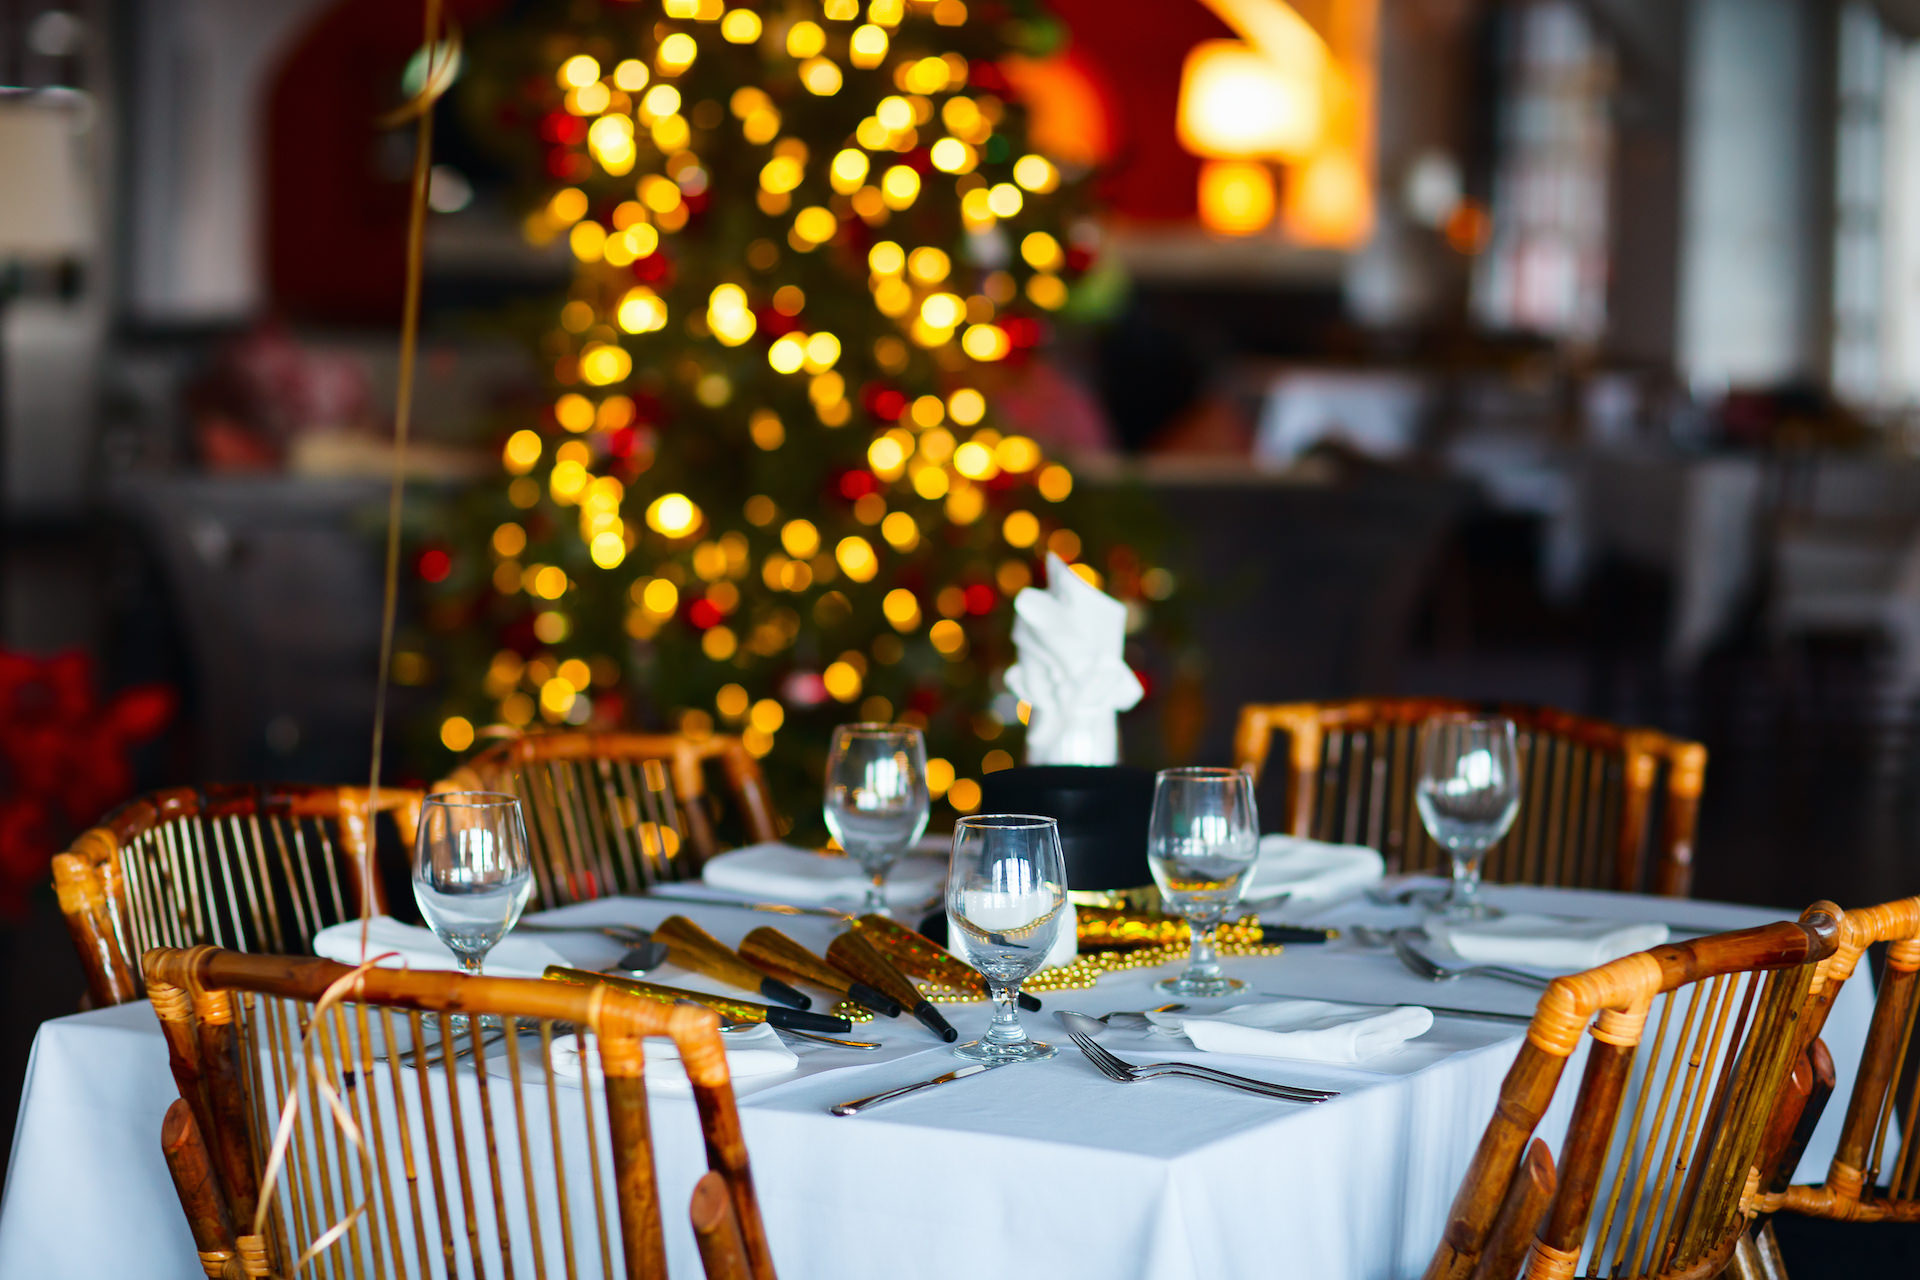 Beautiful table setting for Christmas party or New Year celebration in restaurant